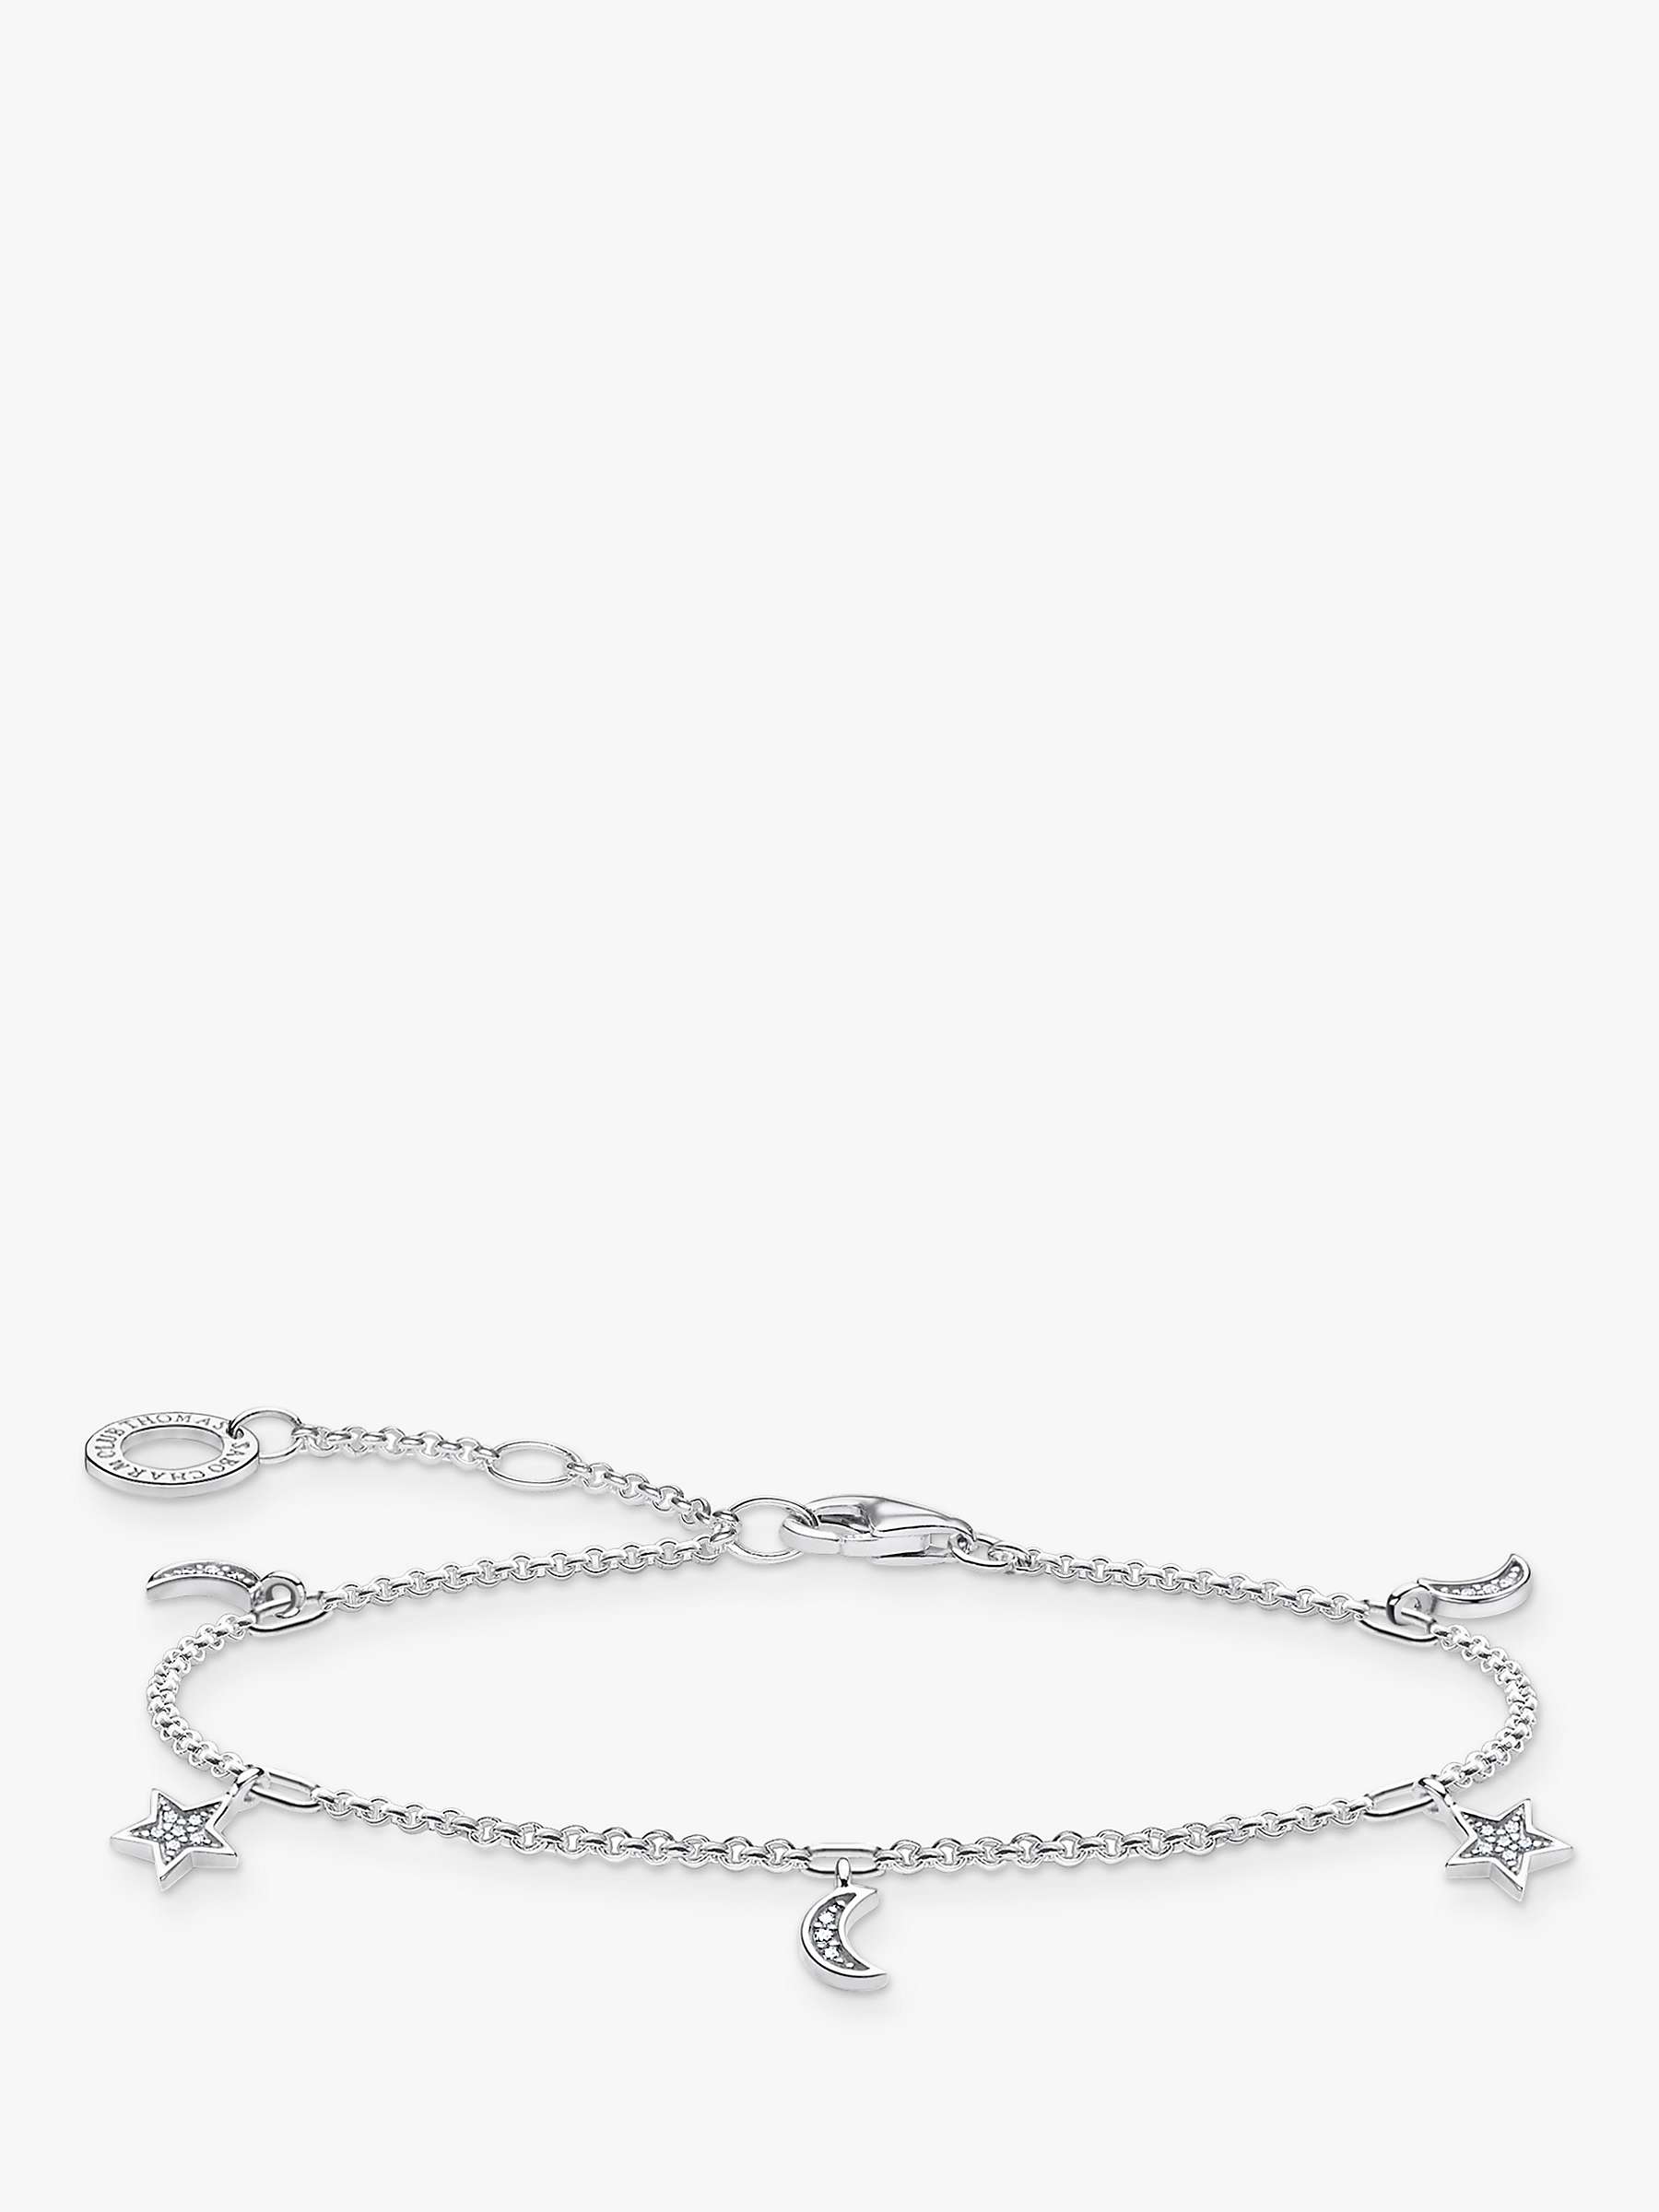 Buy THOMAS SABO Star and Crescent Moon Charm Chain Bracelet, Silver Online at johnlewis.com